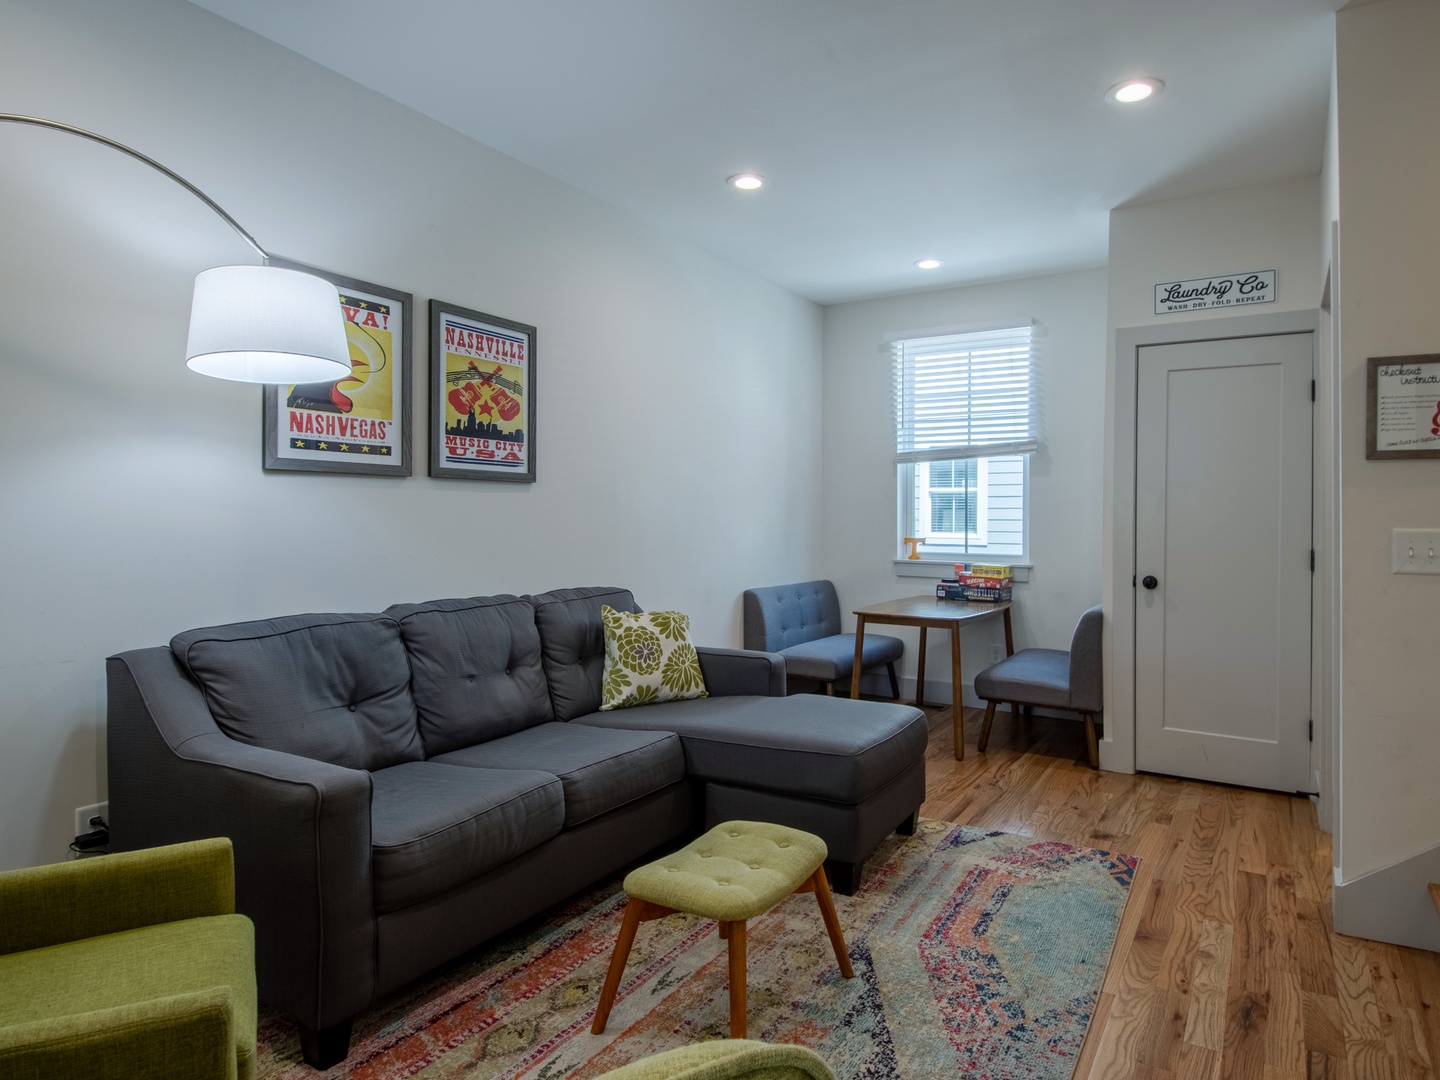 Mid level living are with ample seating, TV, and board games (2nd floor)